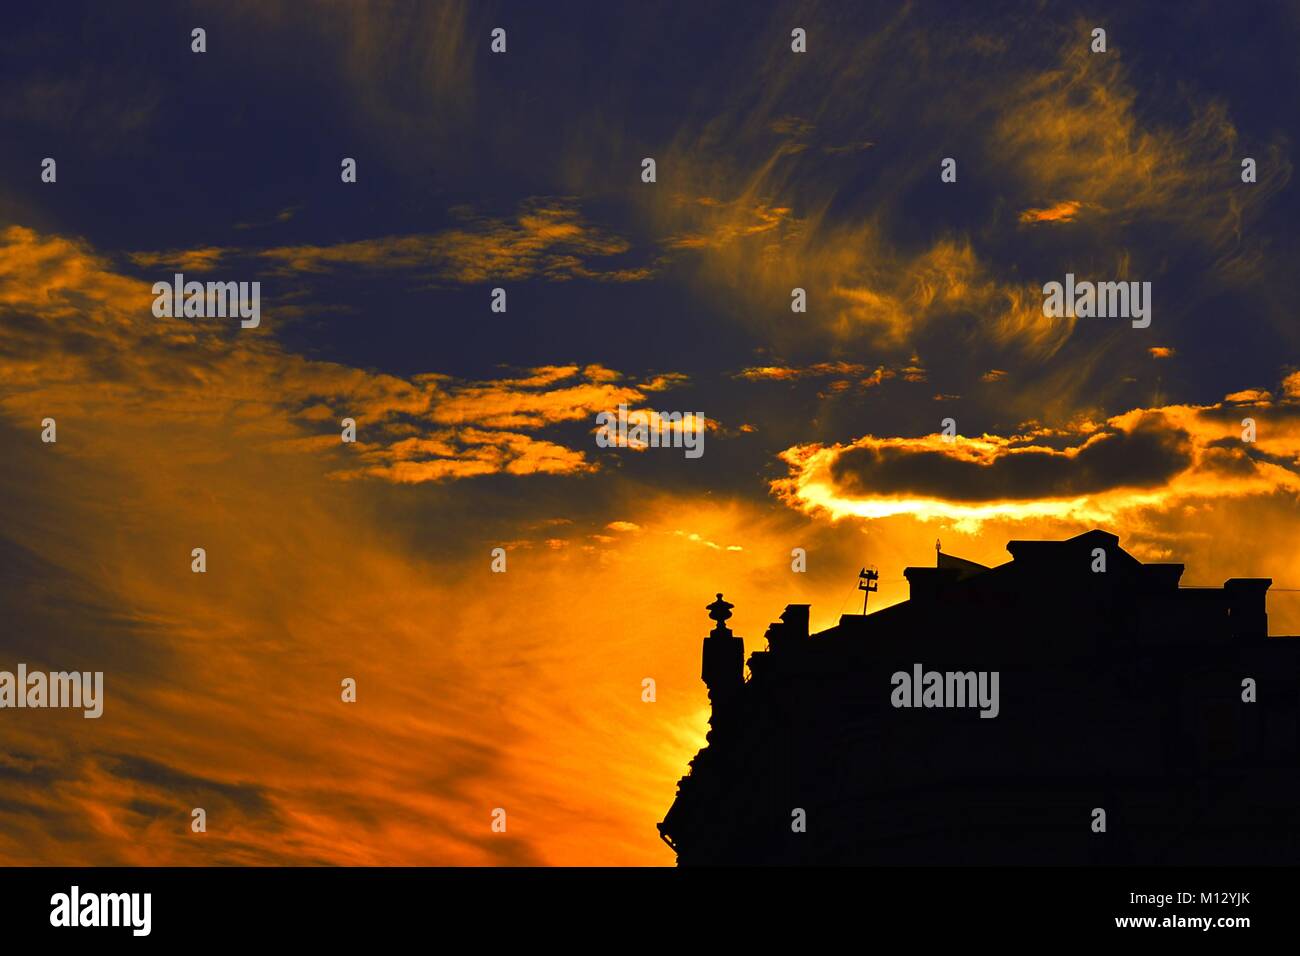 A silhouette of a house during wtilight Stock Photo